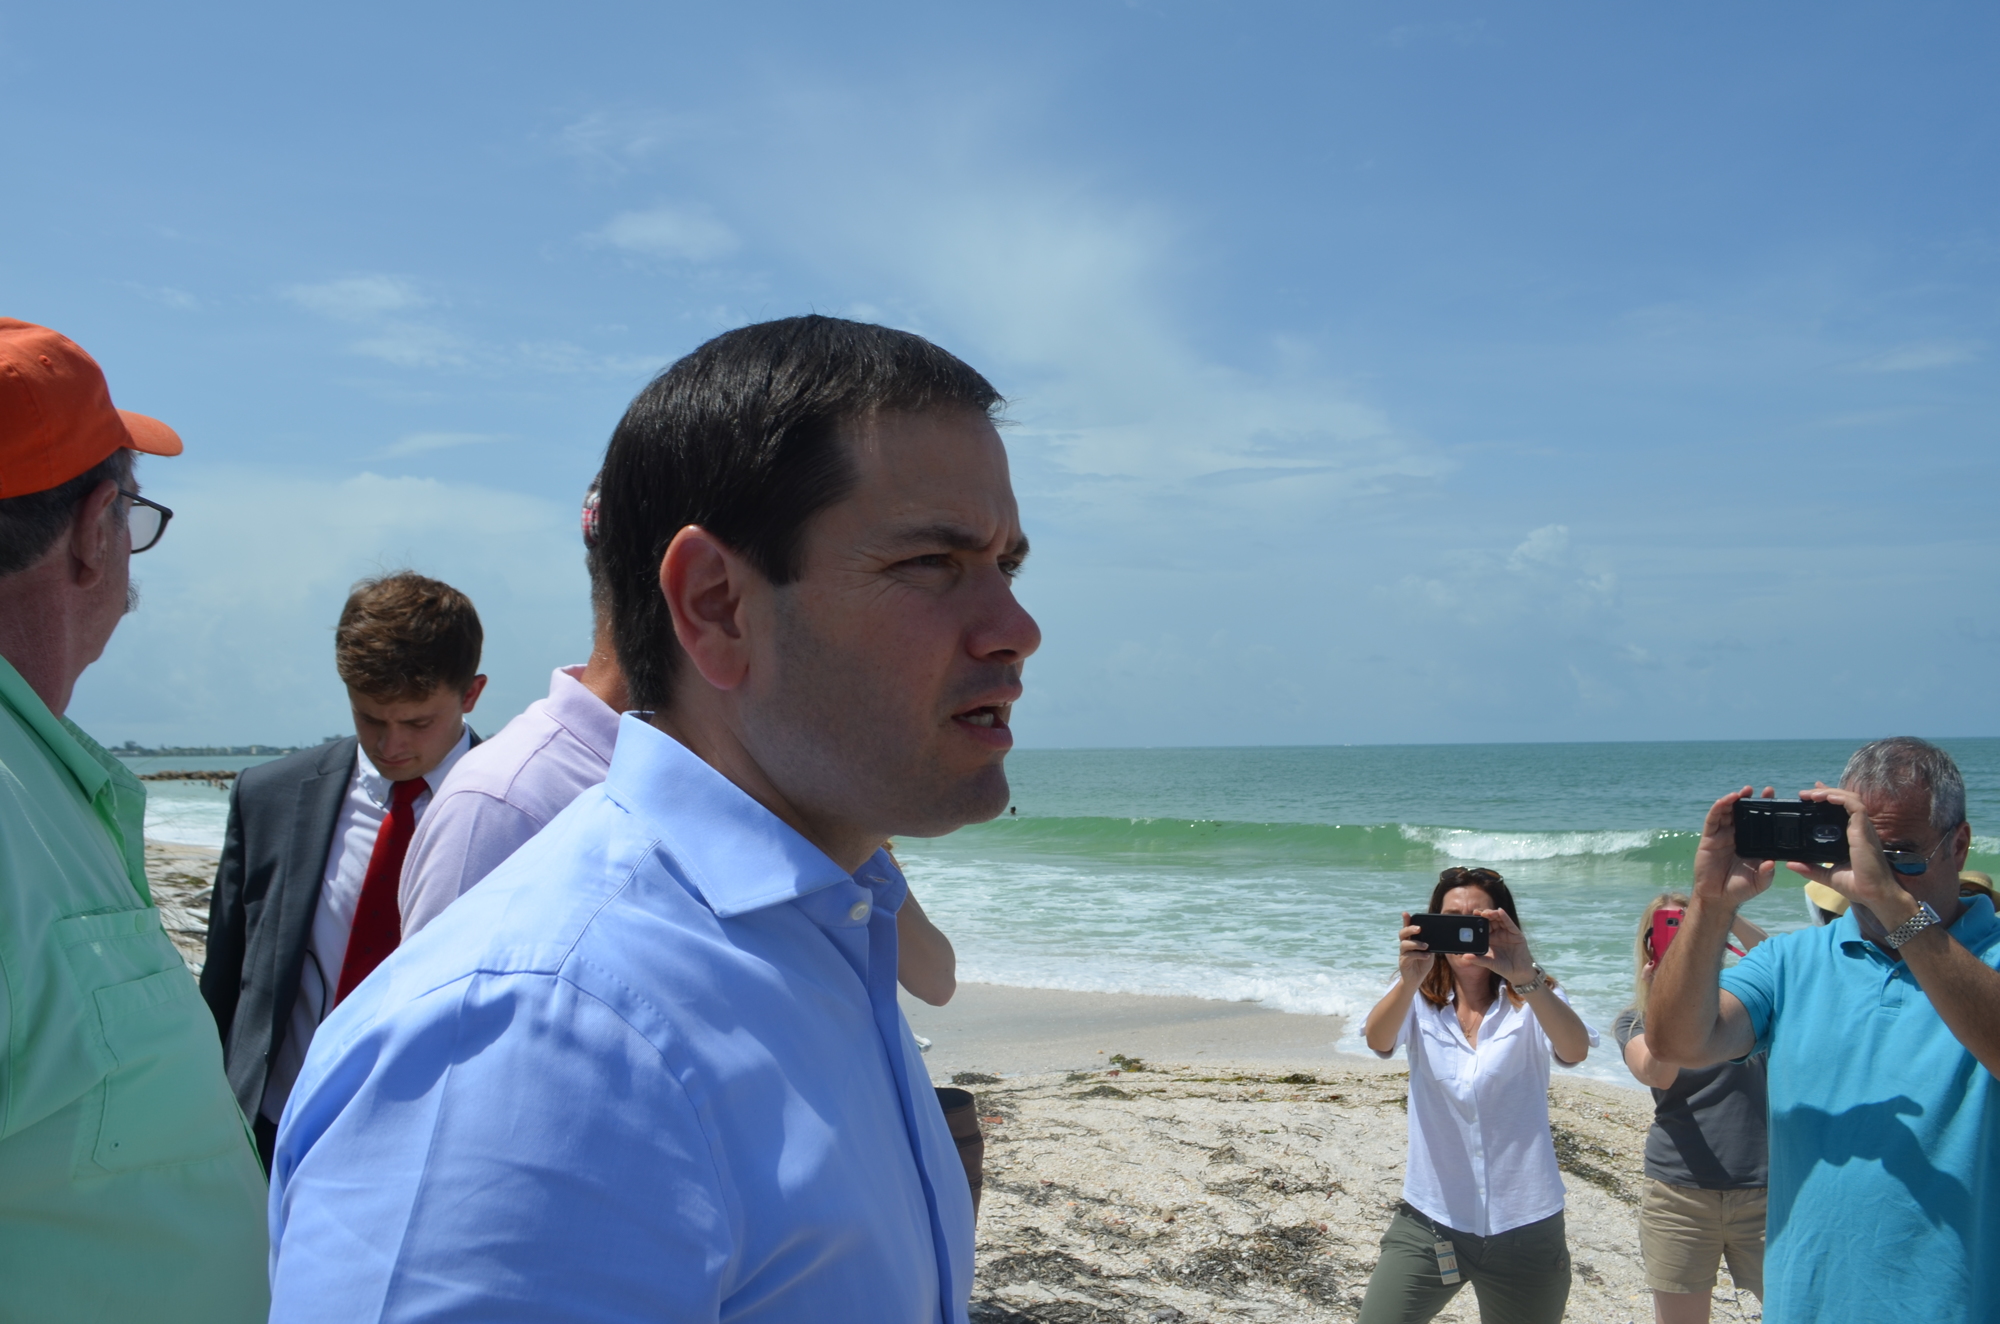 Sen. Marco Rubio expressed a desire to get sand on Lido Key as quickly as possible during his visit today.